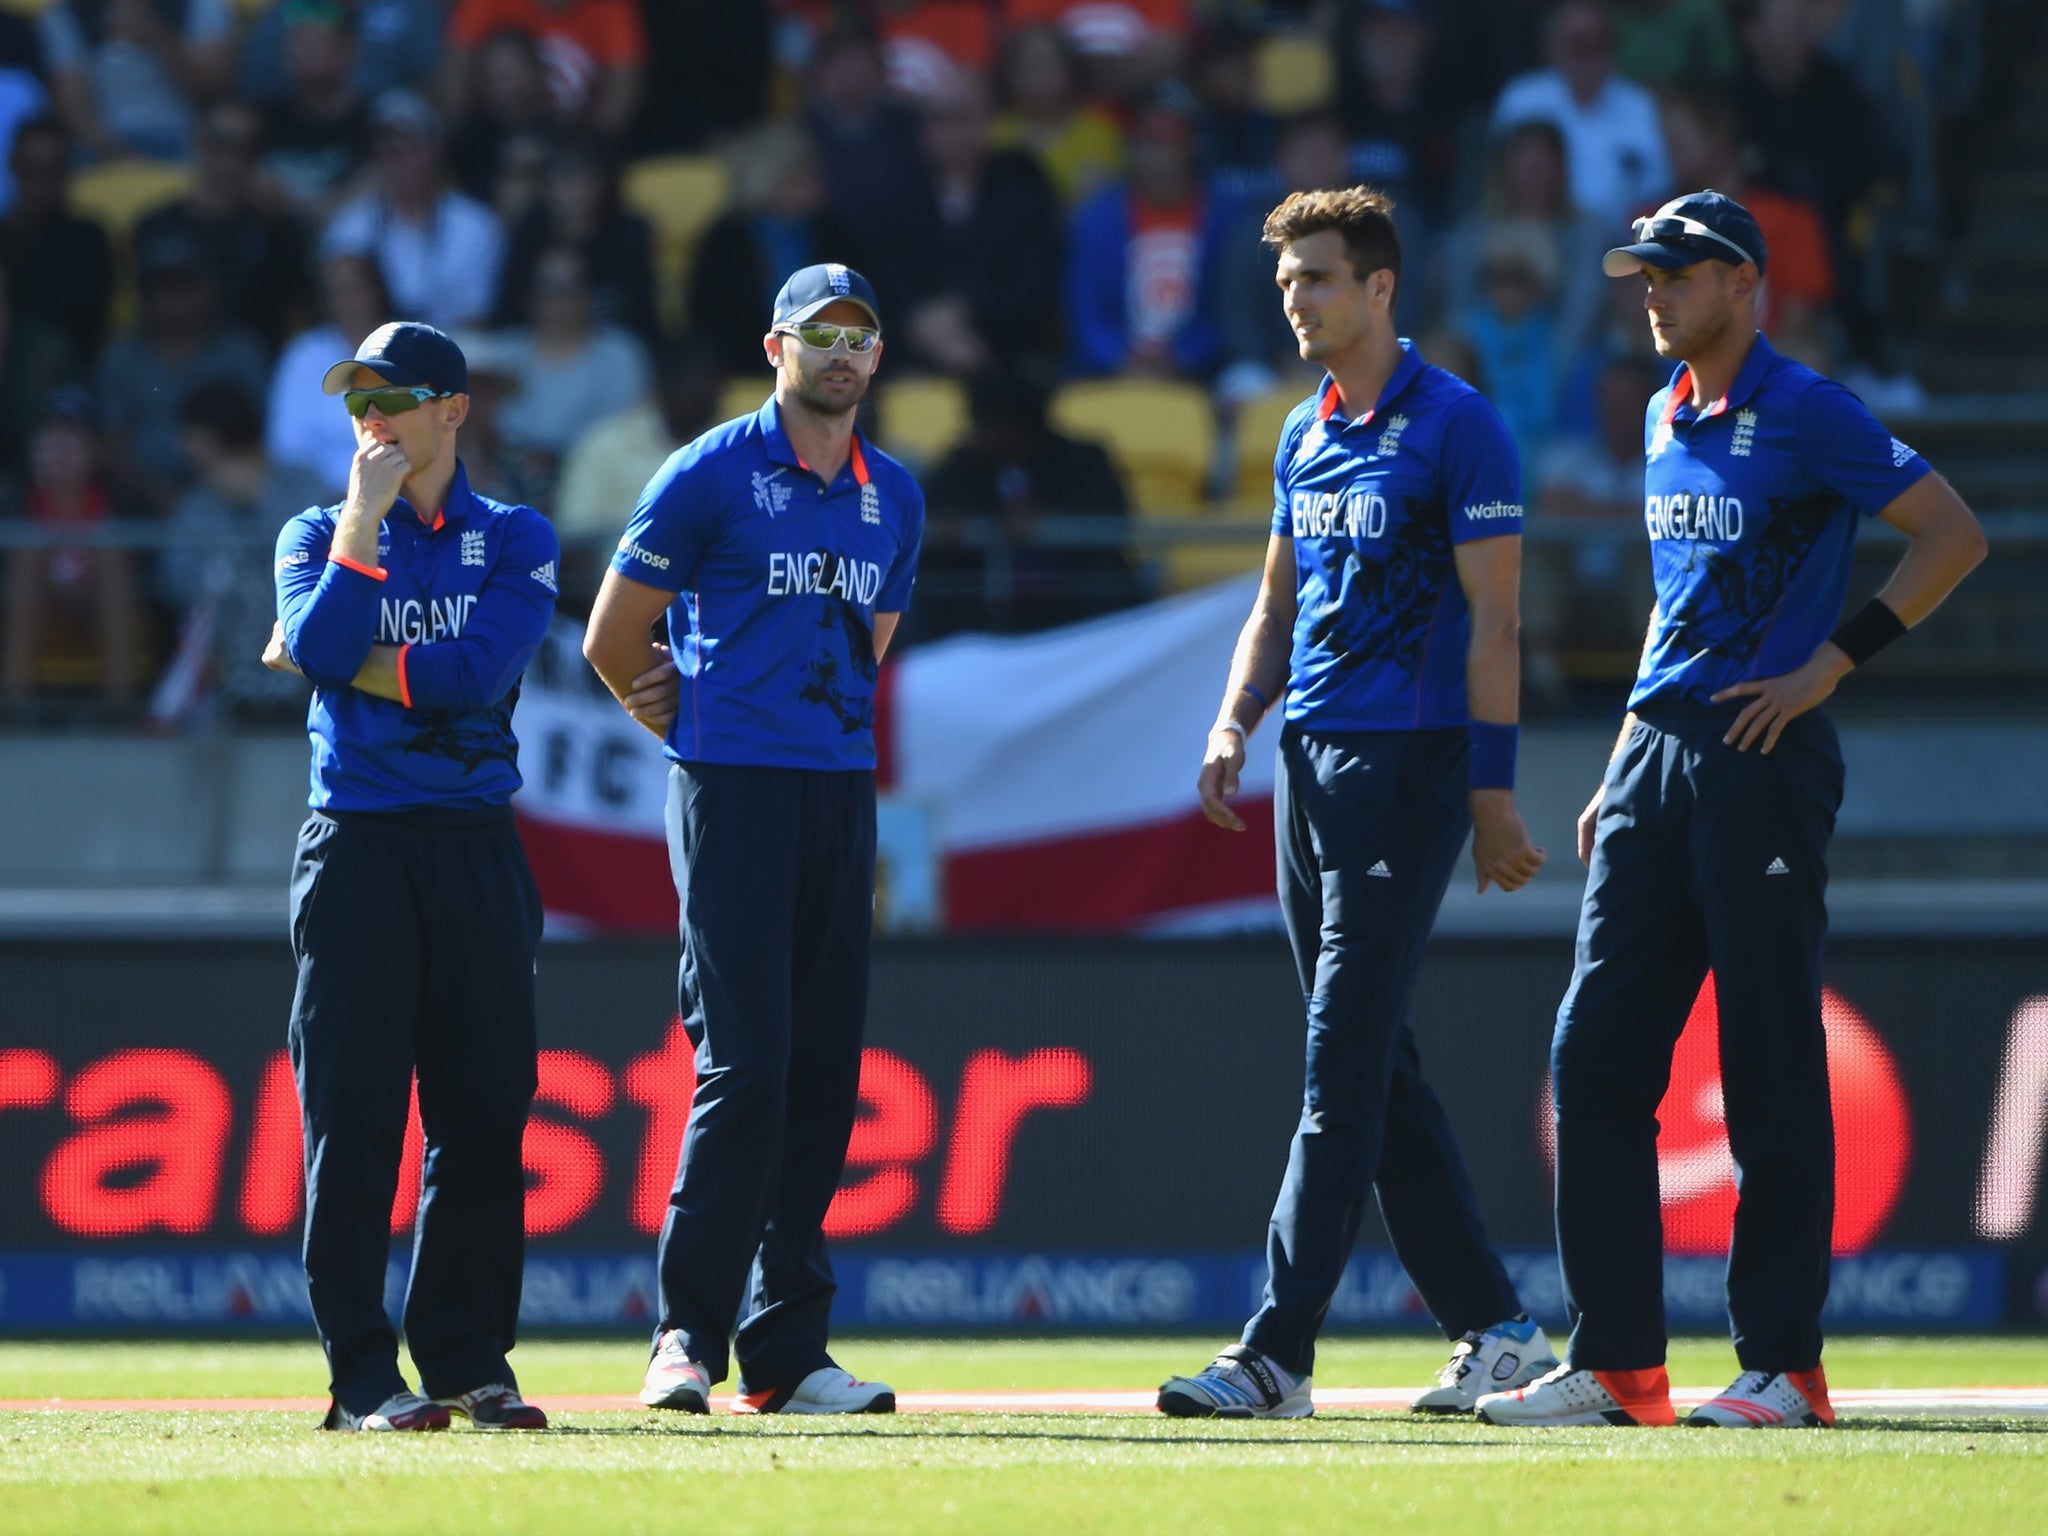 England captain Eoin Morgan talks with bowlers James Anderson, Steven Finn and Stuart Broad